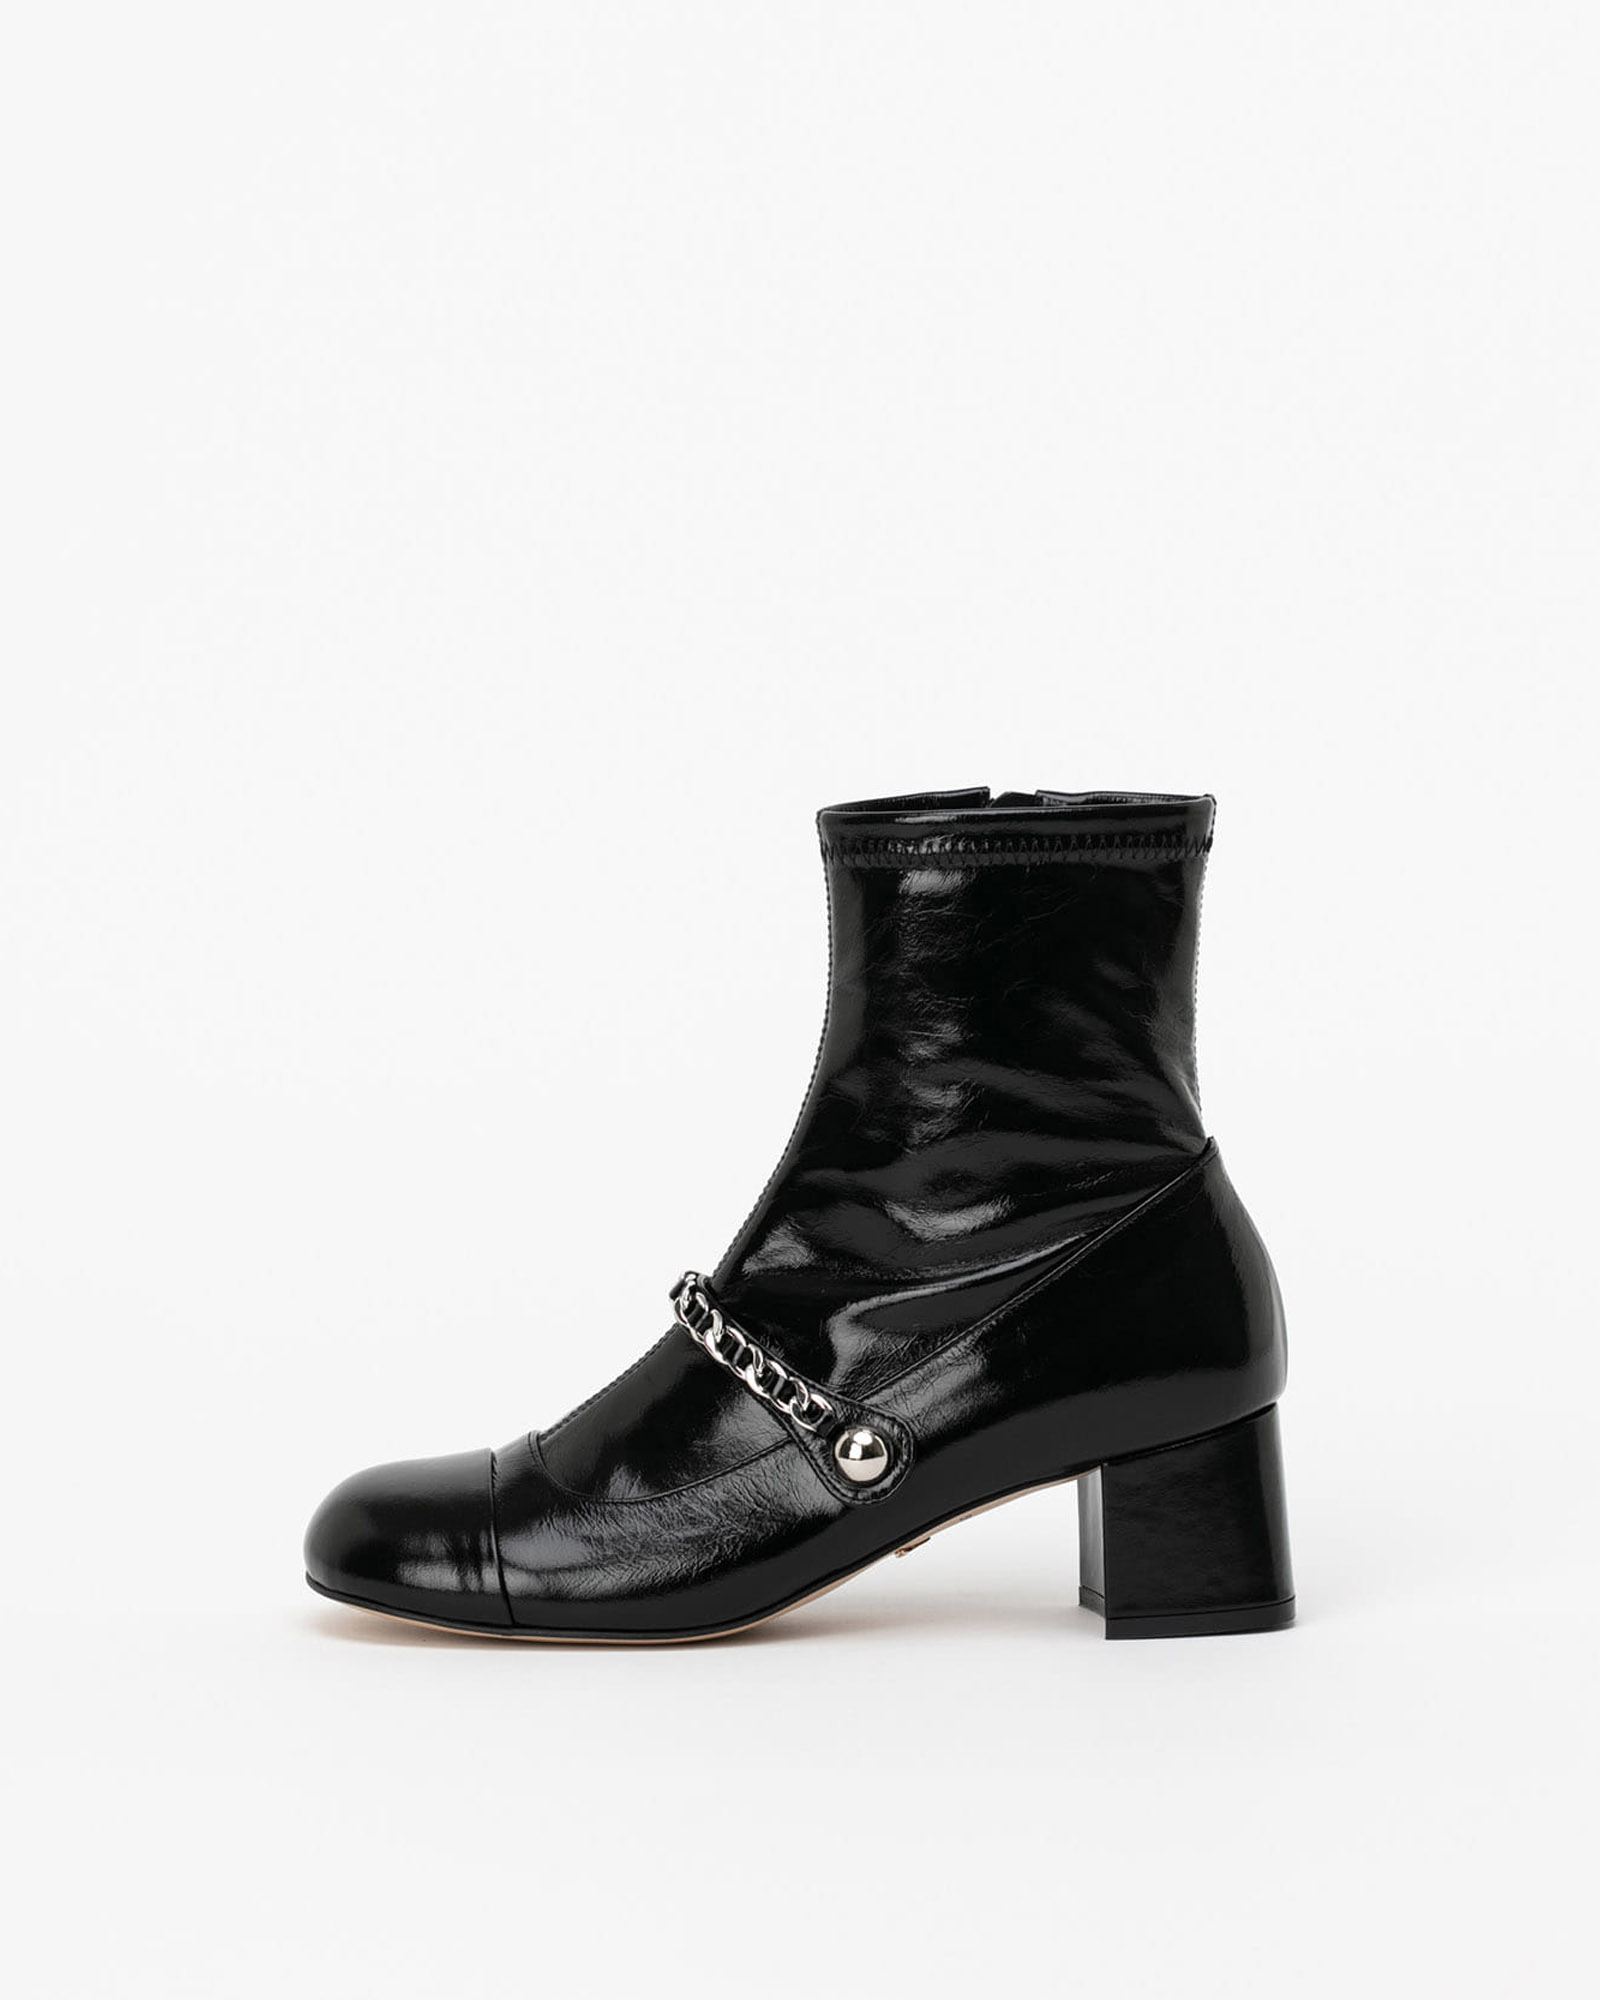 Aria Chained Boots in Wrinkled Black